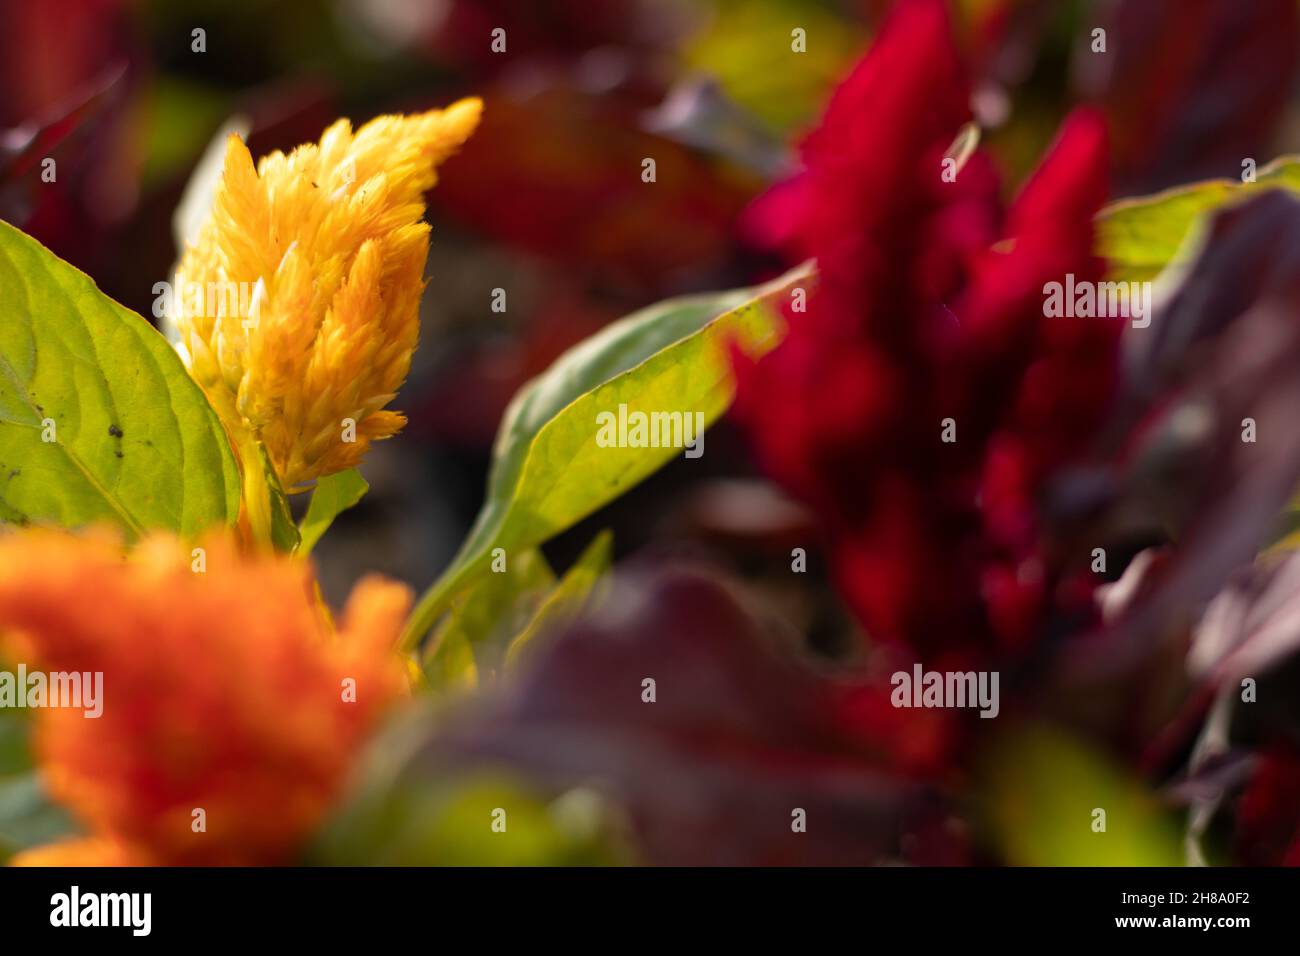 Selective Focus On Plumed Yellow Argentea Celosia Plumosa Flower Also Known As Chinese Wool, Amaranthus, Amarnath Wool, Indian Murga Phool On Colorful Stock Photo